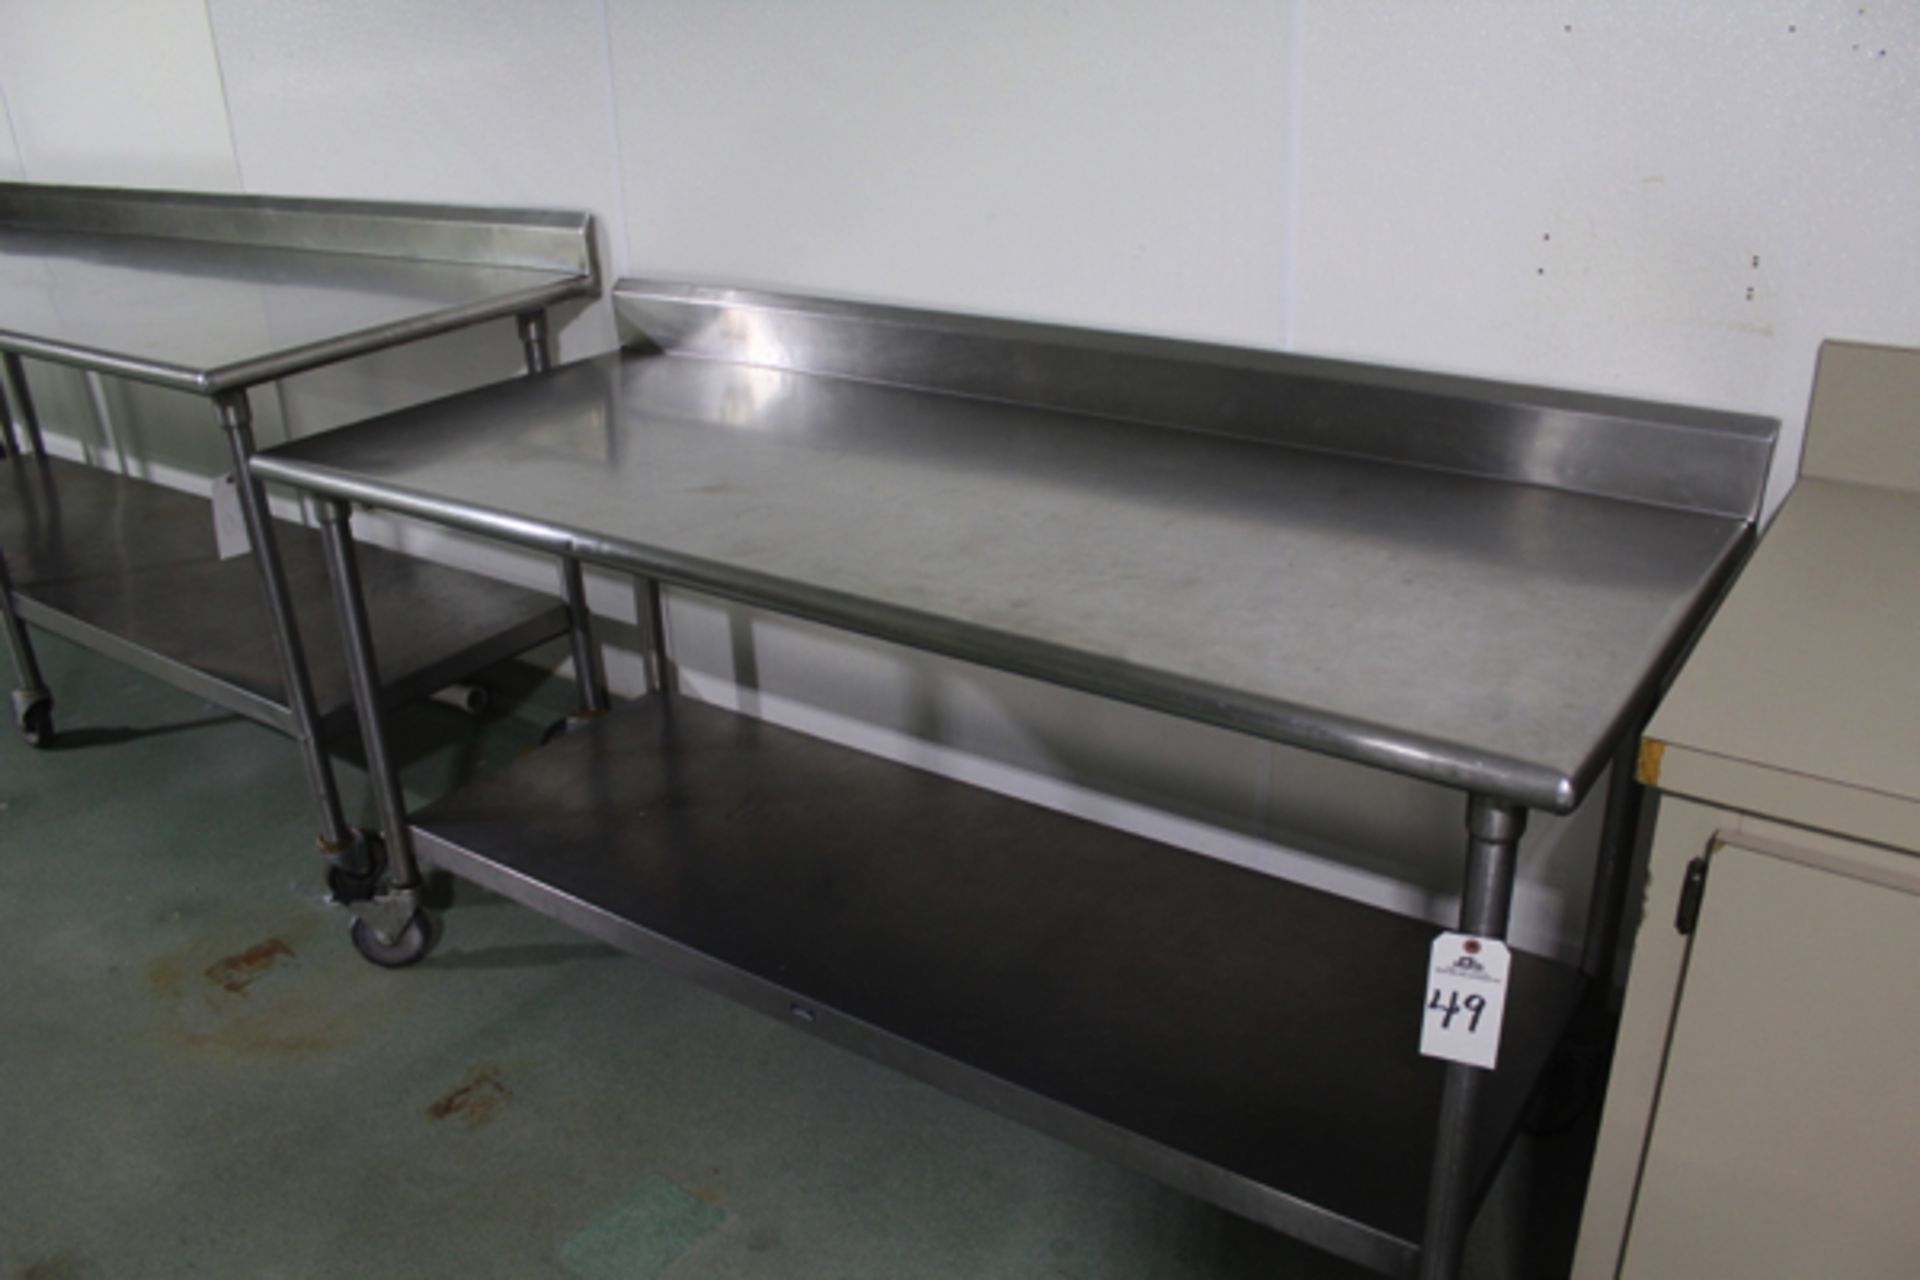 Stainless Steel Prep Table, 30" x 6' | Loading Price: $25 Or Buyer May Hand Carry By February 3rd,